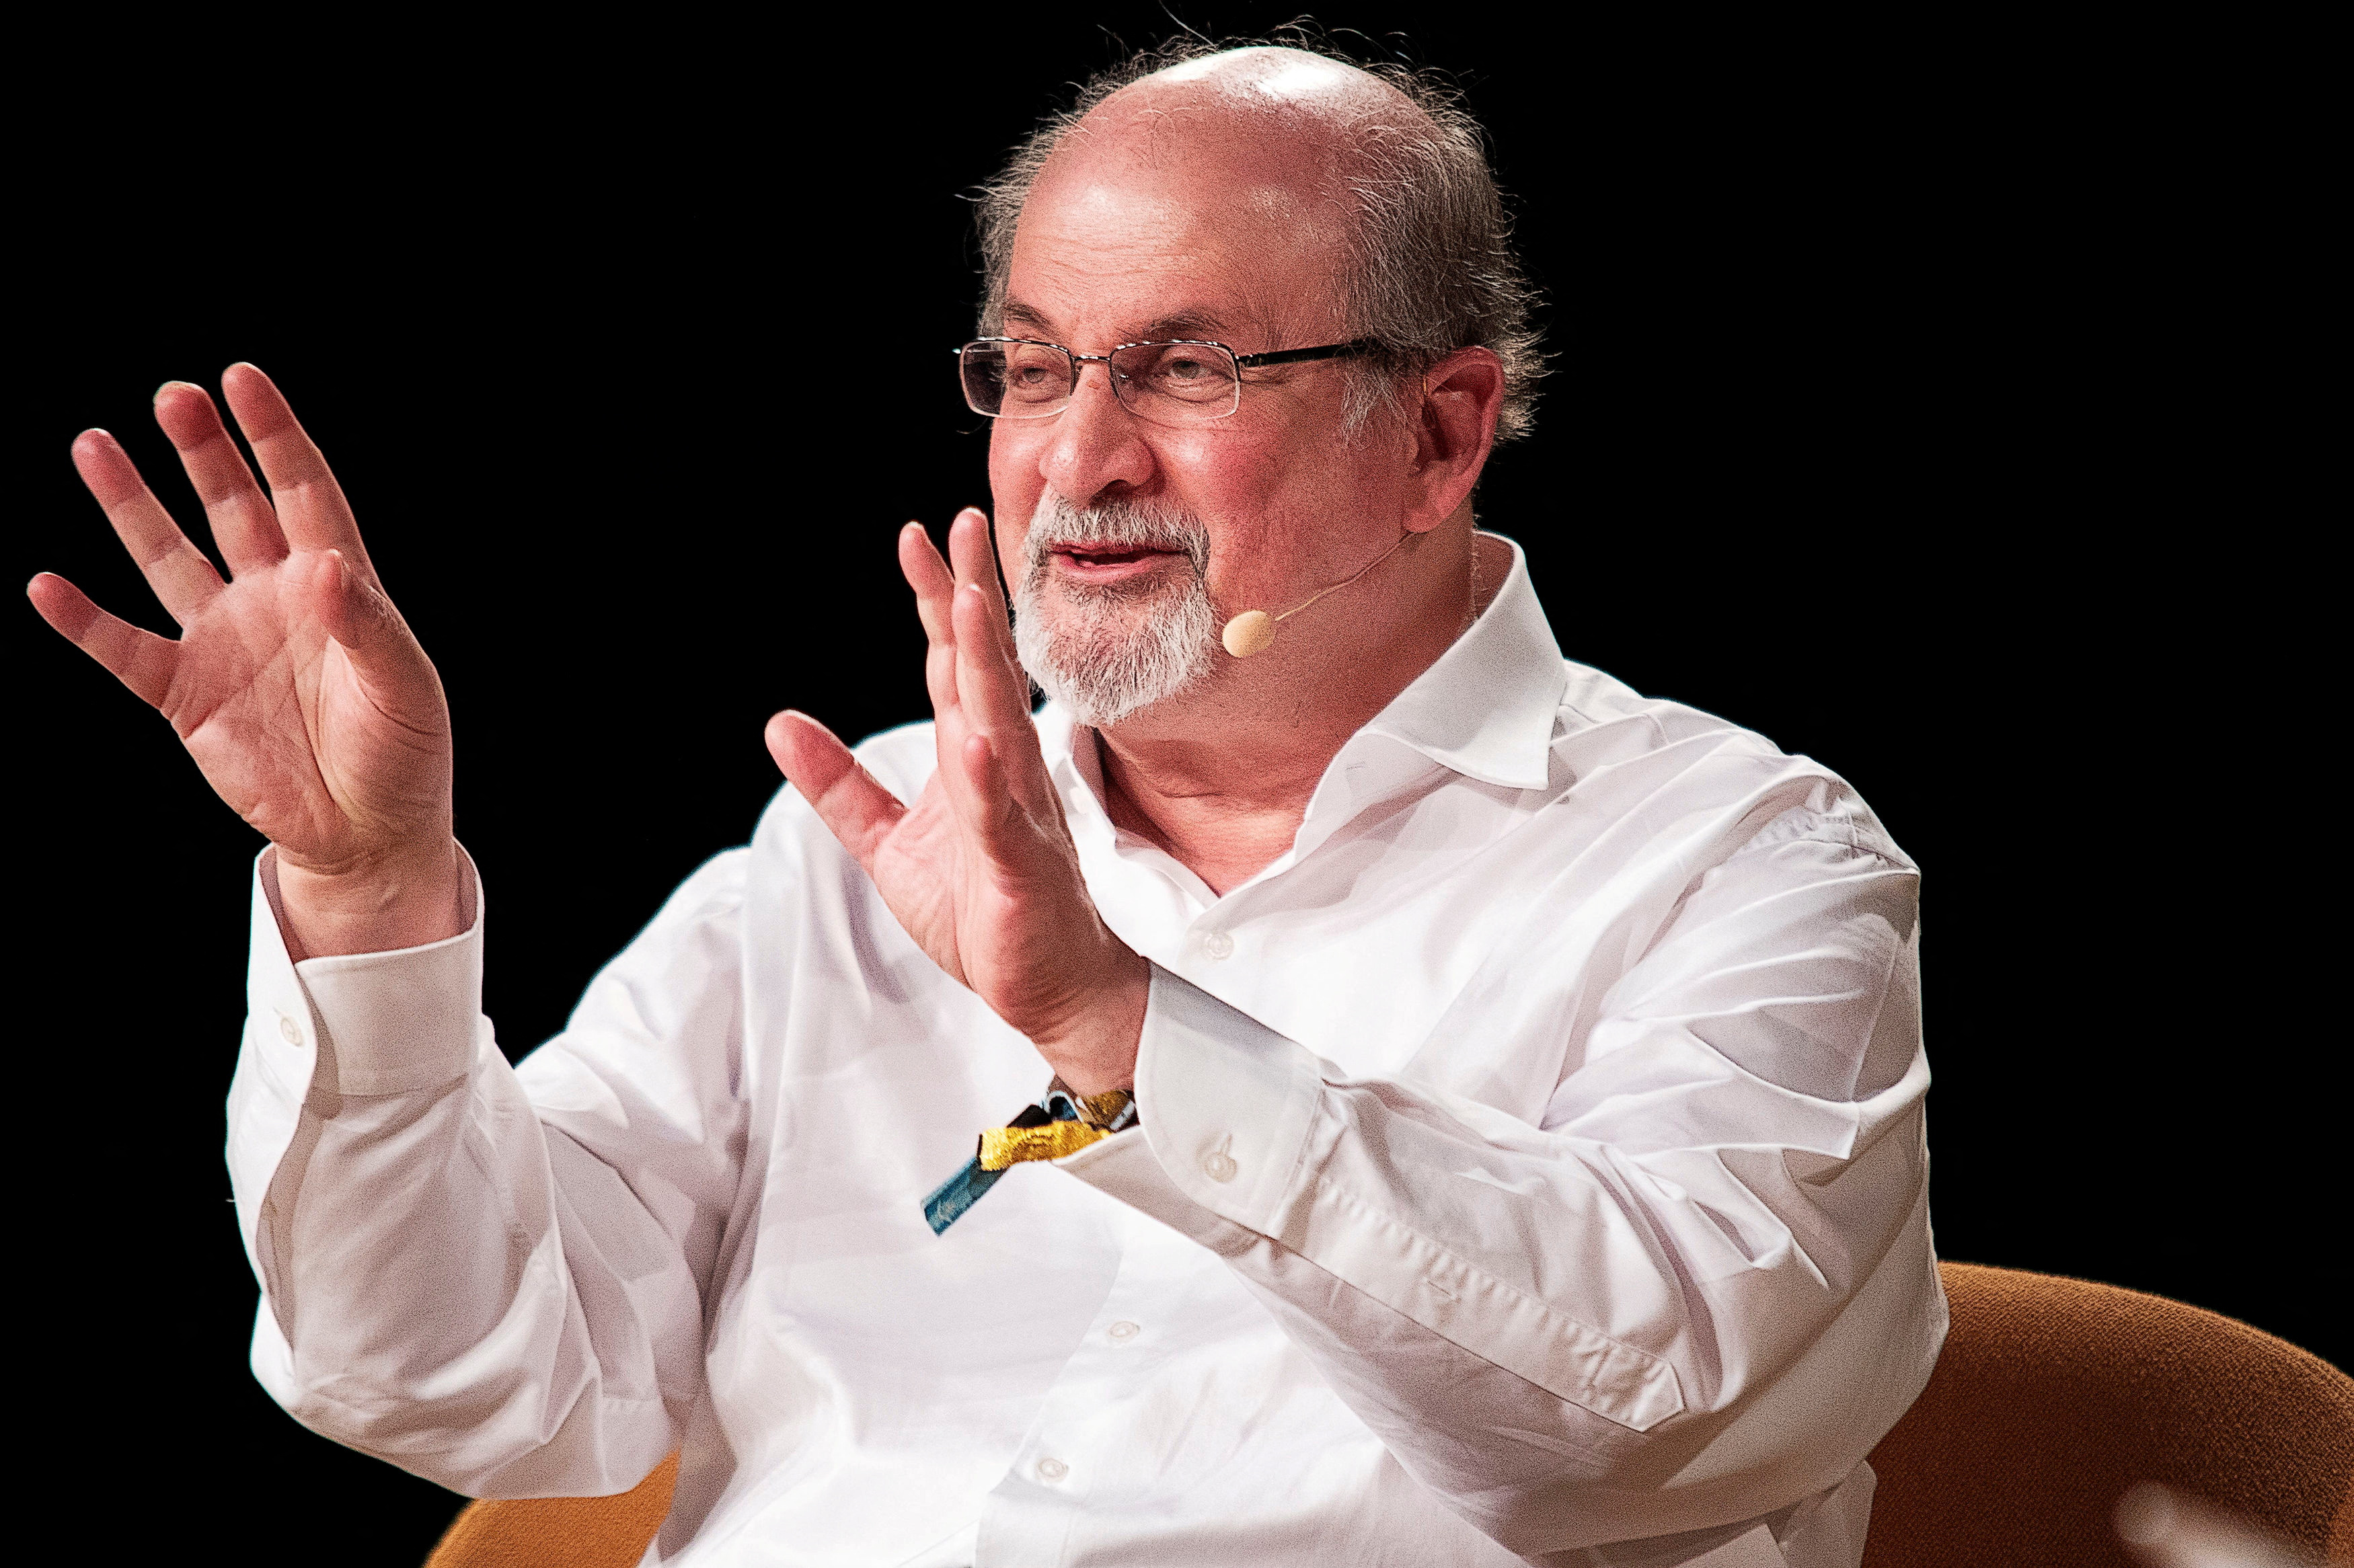 The writer Salman Rushdie interviewed during Heartland Festival in Kvaerndrup